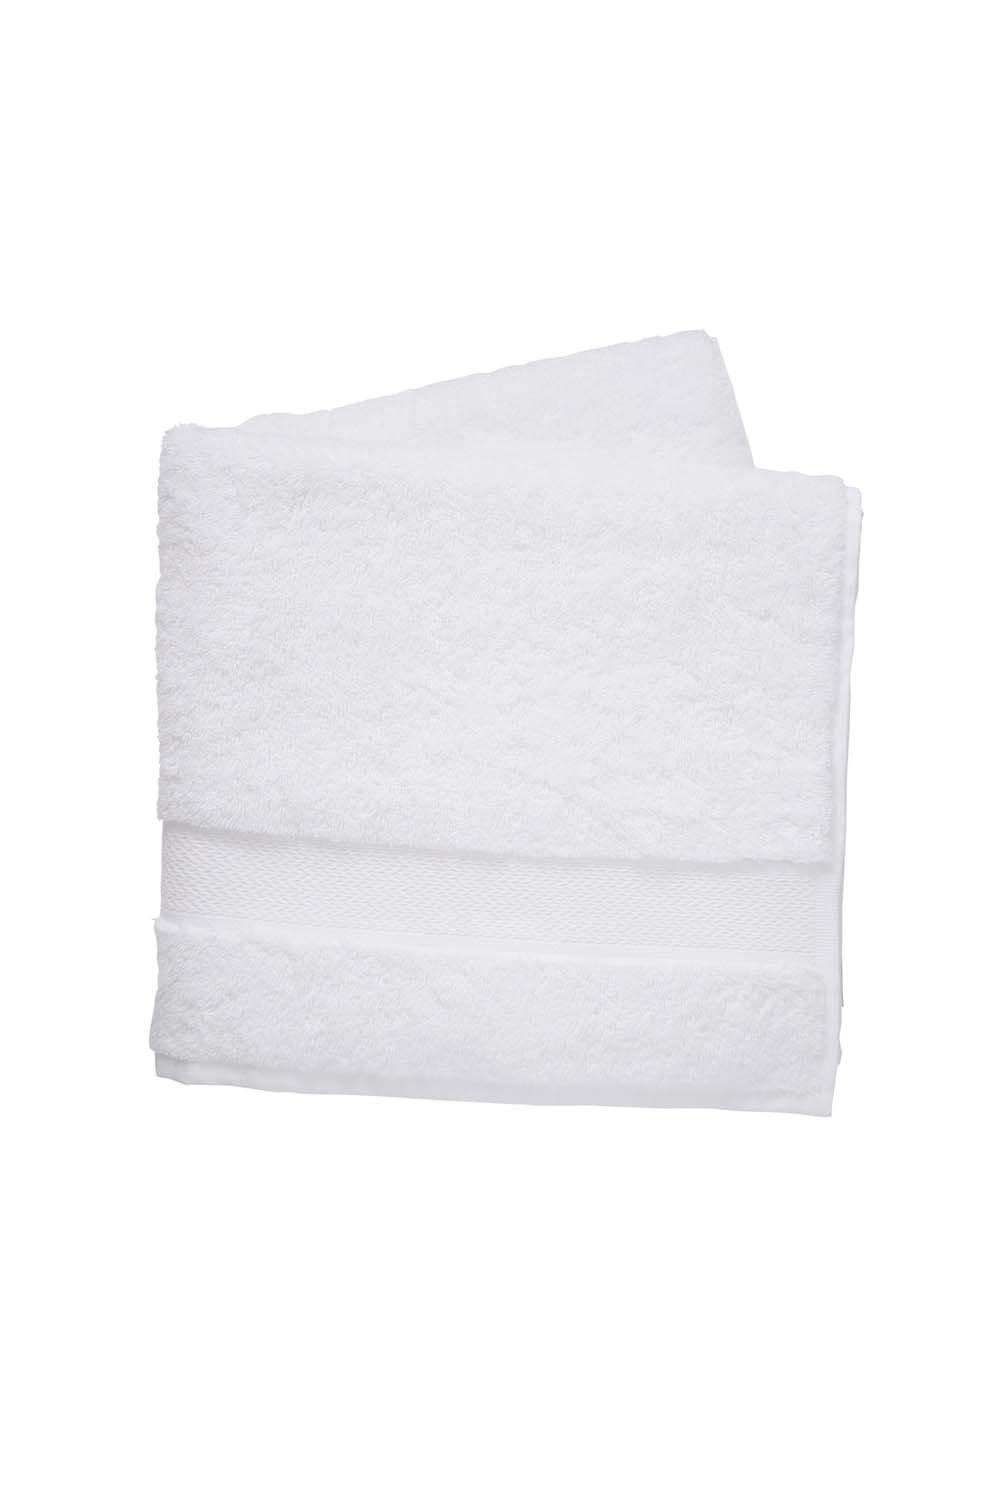 'Cove' Supersoft Cotton Towels